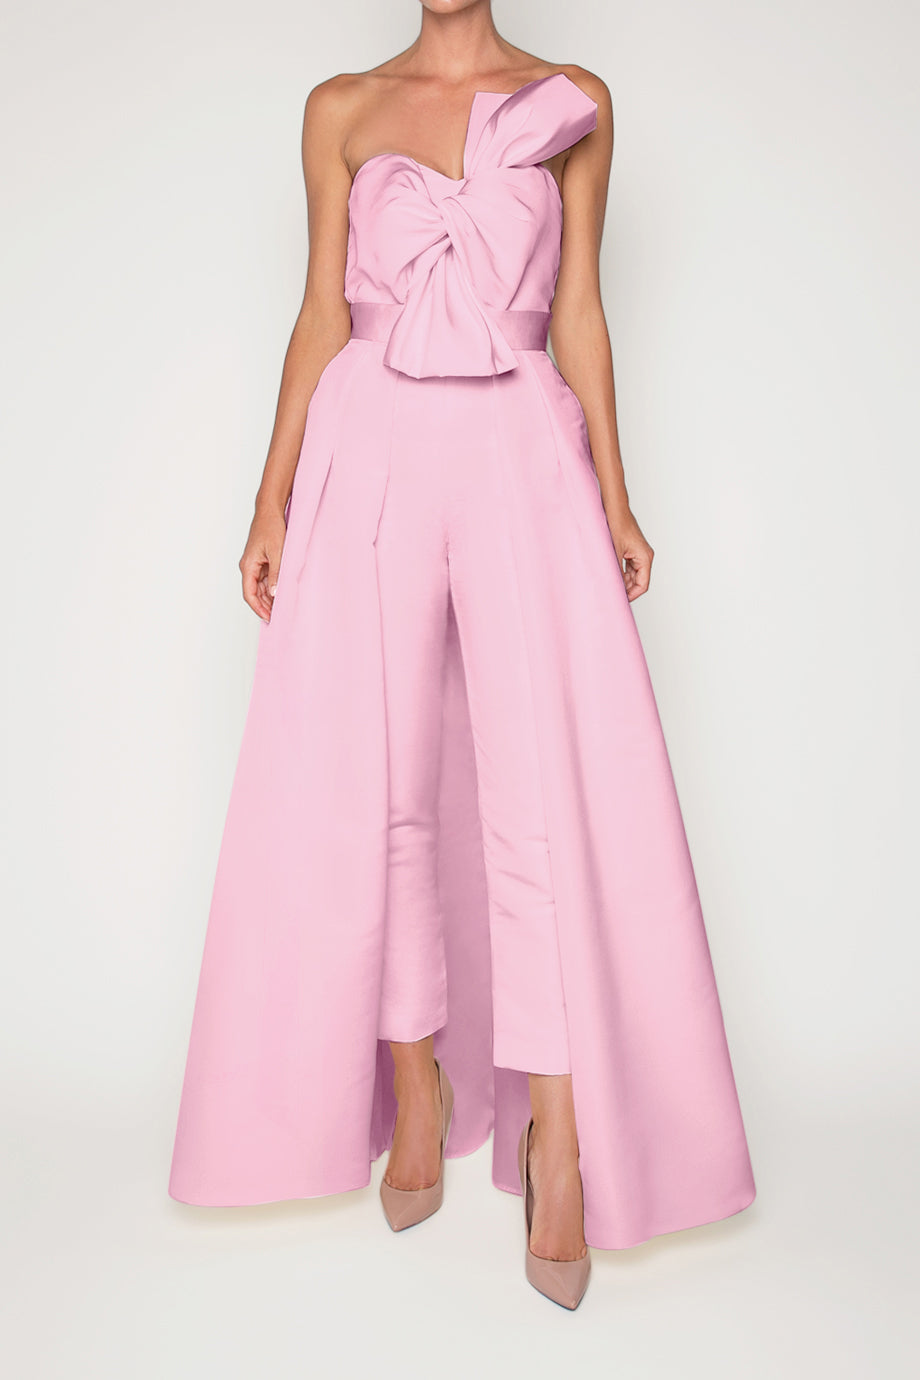 Silk Faille Twisted Bow Jumpsuit with Convertible Skirt – ALEXIA MARÍA